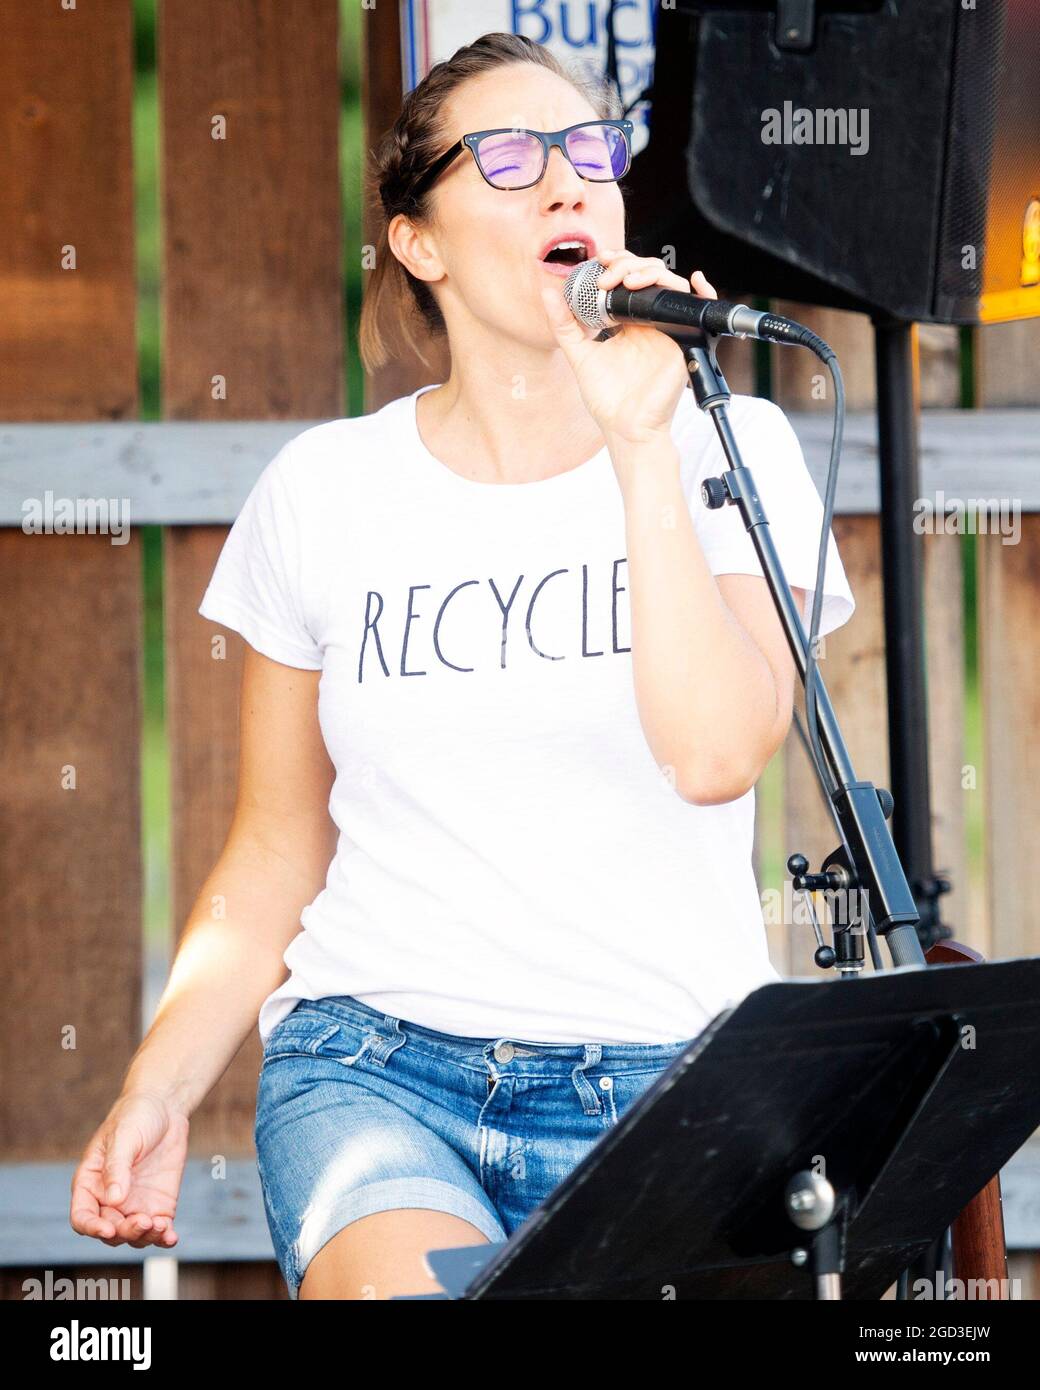 Gahanna, Ohio, USA. 10 August, 2021. Nicki Baker of Chazz and Nicki sings at the Joe Blystone Rally in Gahanna, Ohio. Blystone is a Republican running for Governor of Ohio in 2022. Credit: Brent Clark/Alamy Stock Photo